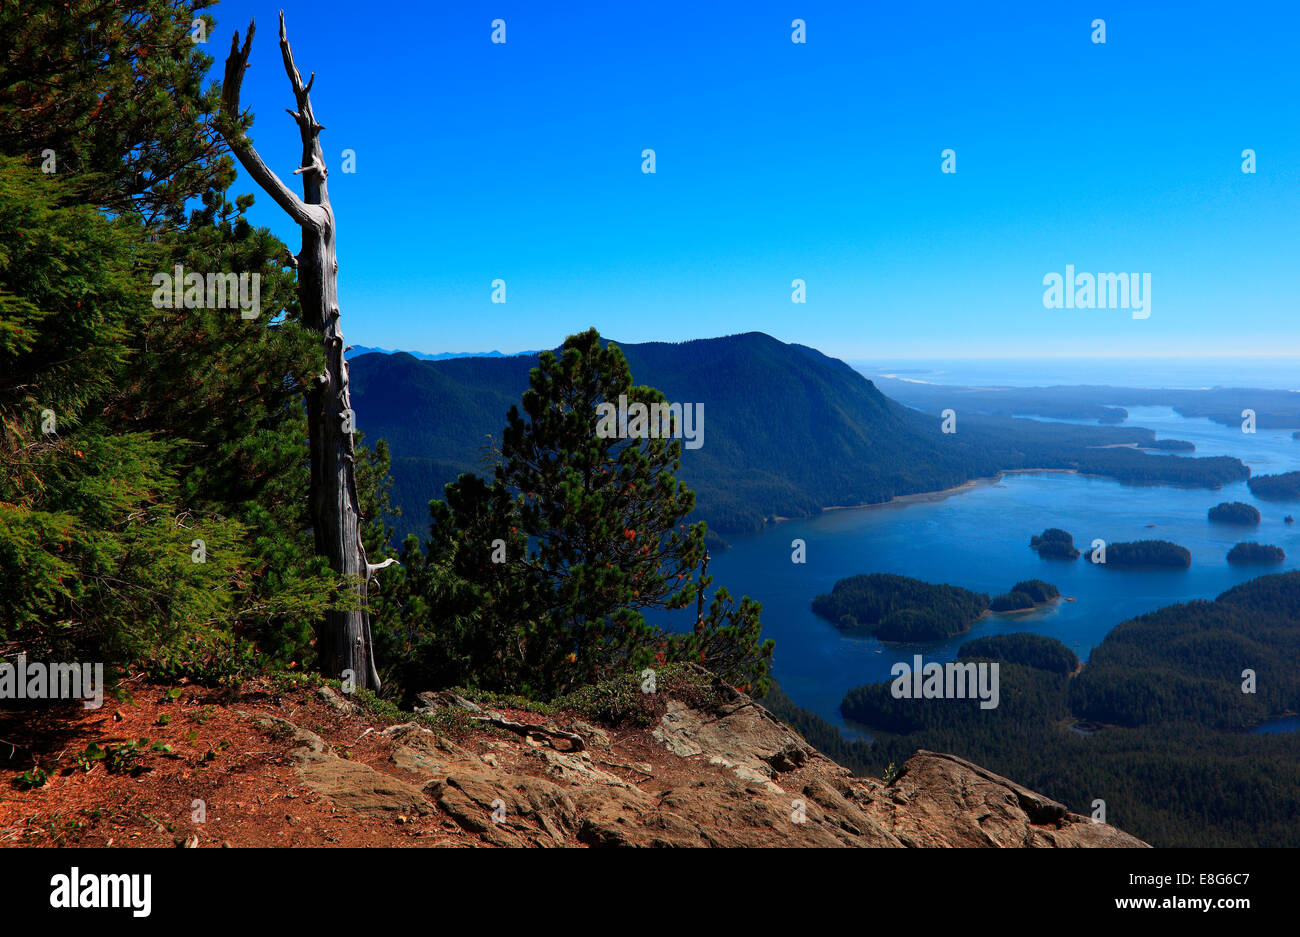 View from the top of Lone cone mountain looking at part of meares island and clayoquot sound Stock Photo